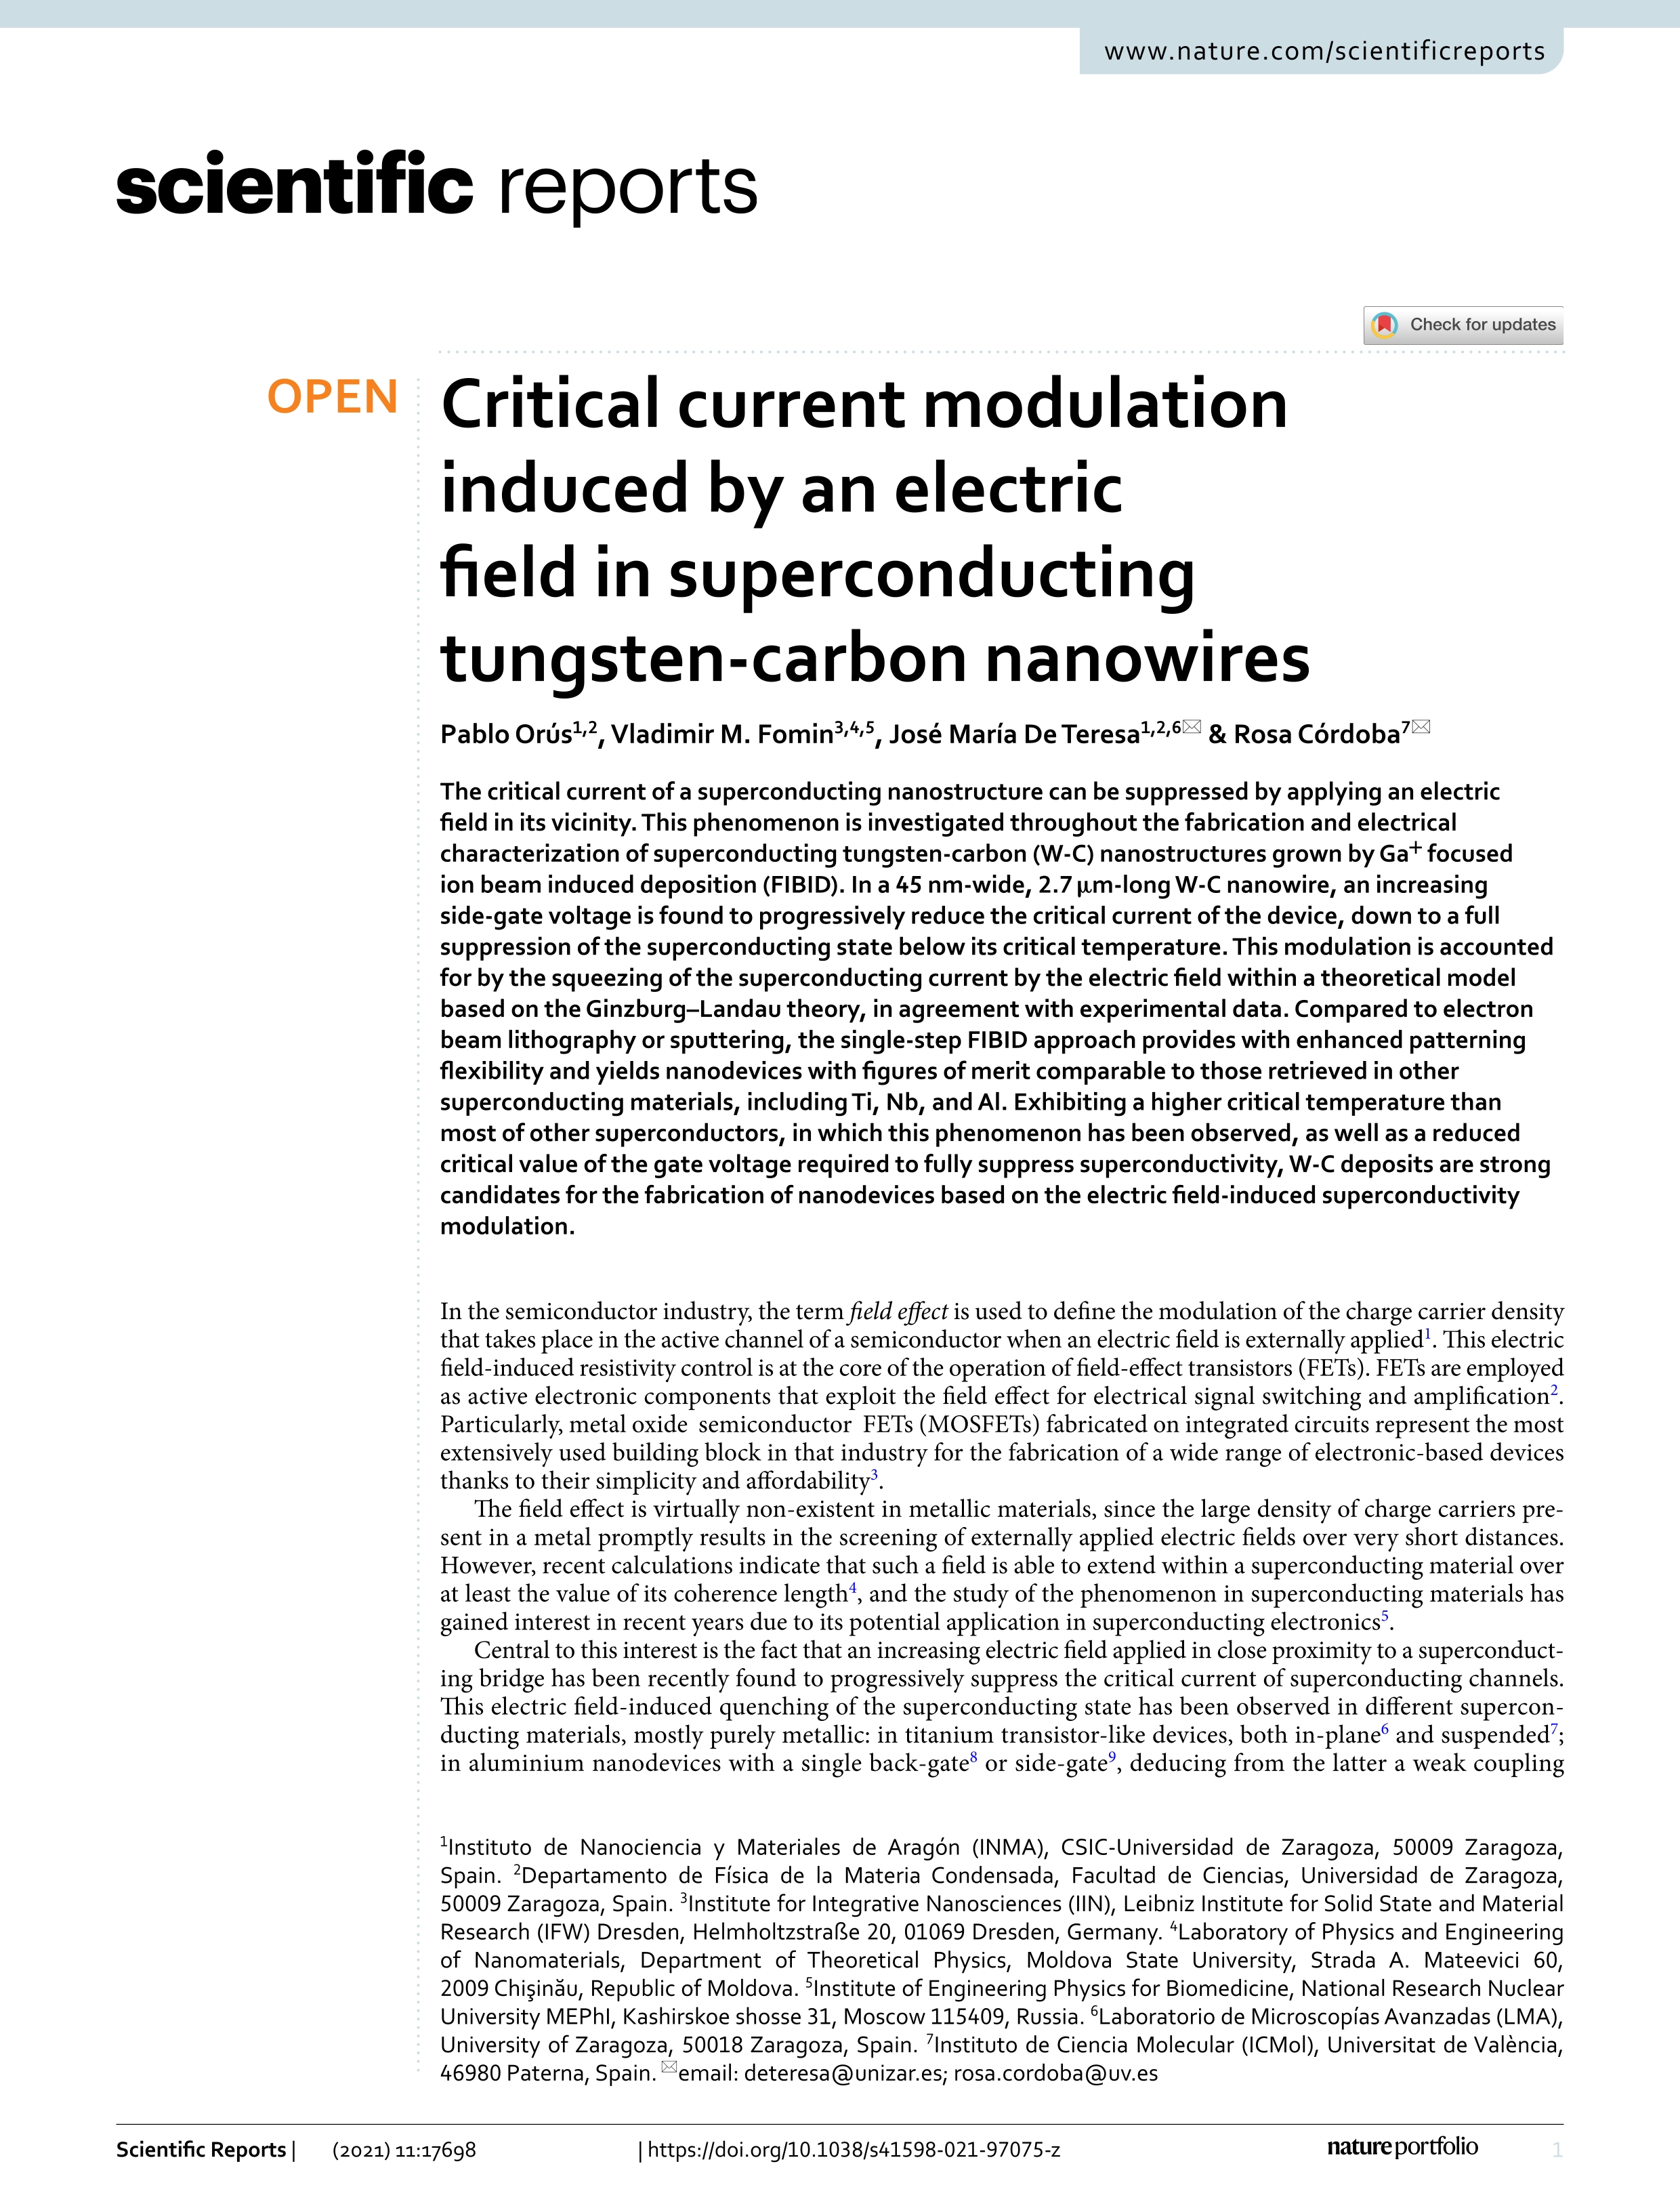 Critical current modulation induced by an electric field in superconducting tungsten-carbon nanowires